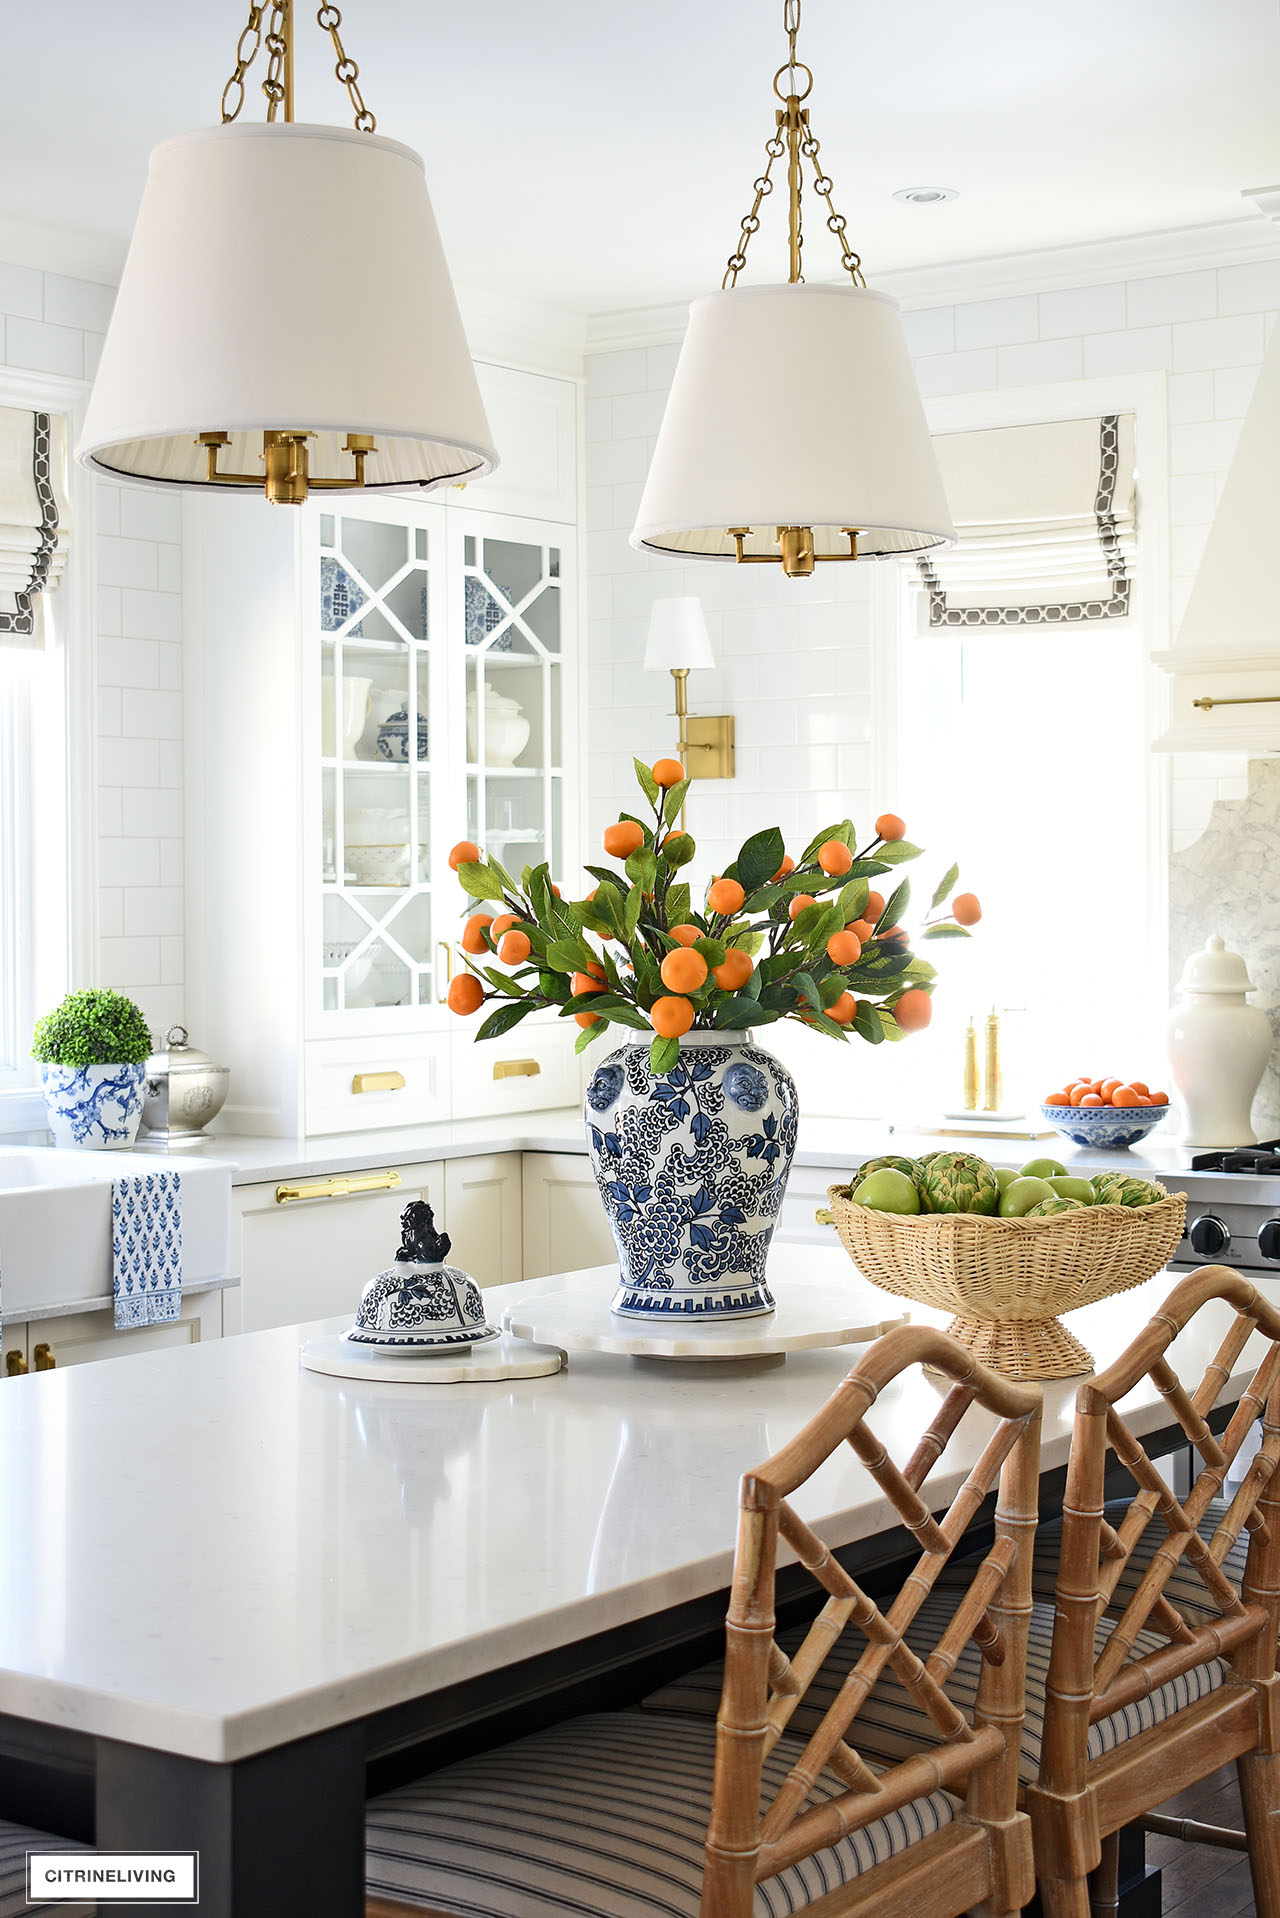 Kitchen island decorated with ginger jar and faux orange stems.